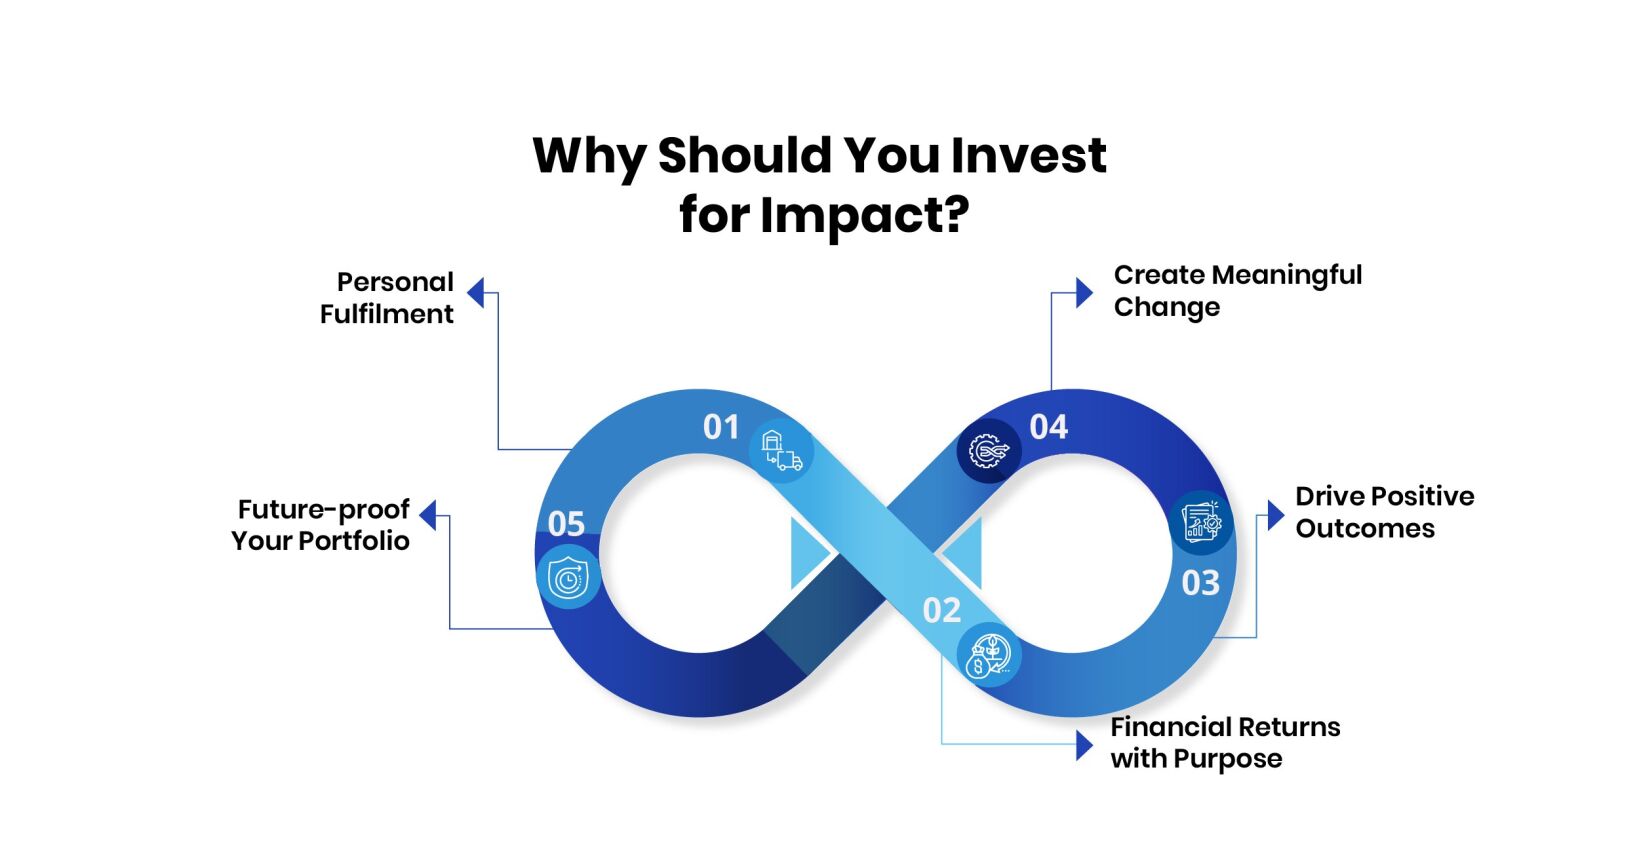 Why Should You Invest for Impact?